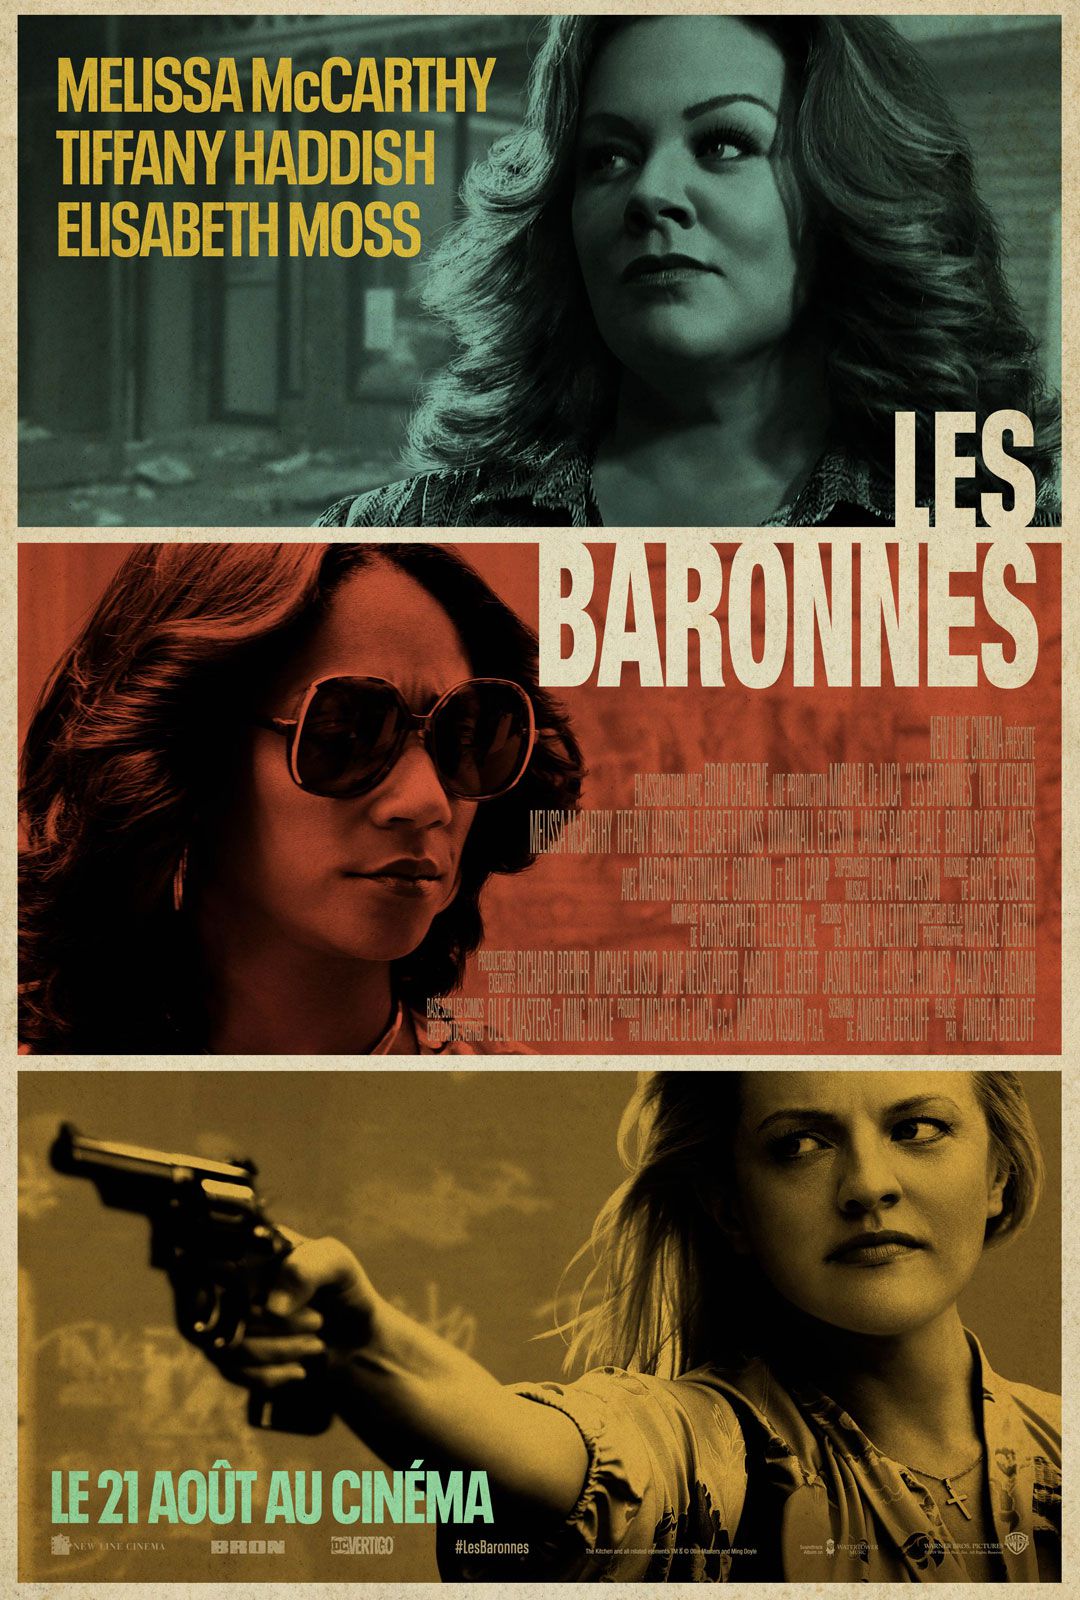 Les Baronnes - Film (2019) streaming VF gratuit complet